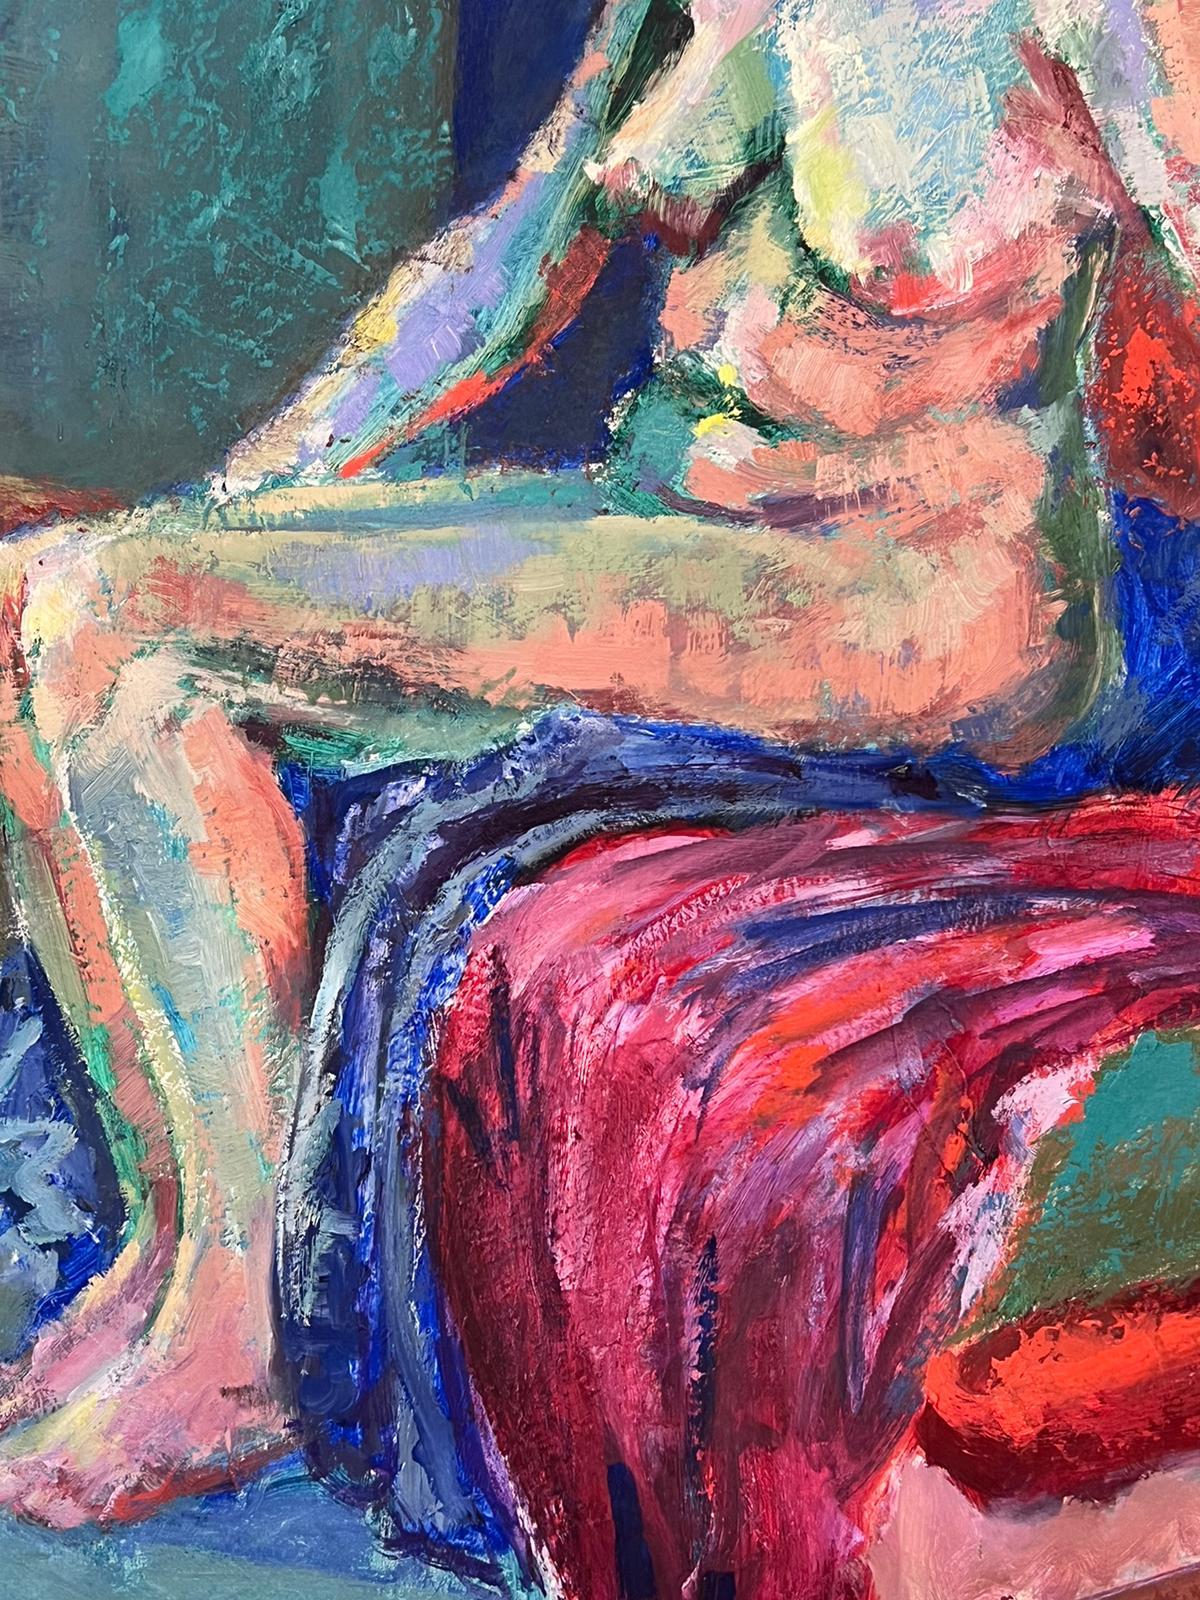 Nude Model
by Helen Greenfield (British 20th century)
signed oil painting on board, unframed
board: 30 x 18 inches
condition: overall very good
provenance: all the paintings we have by this artist have come from their studio sale in England

Helen